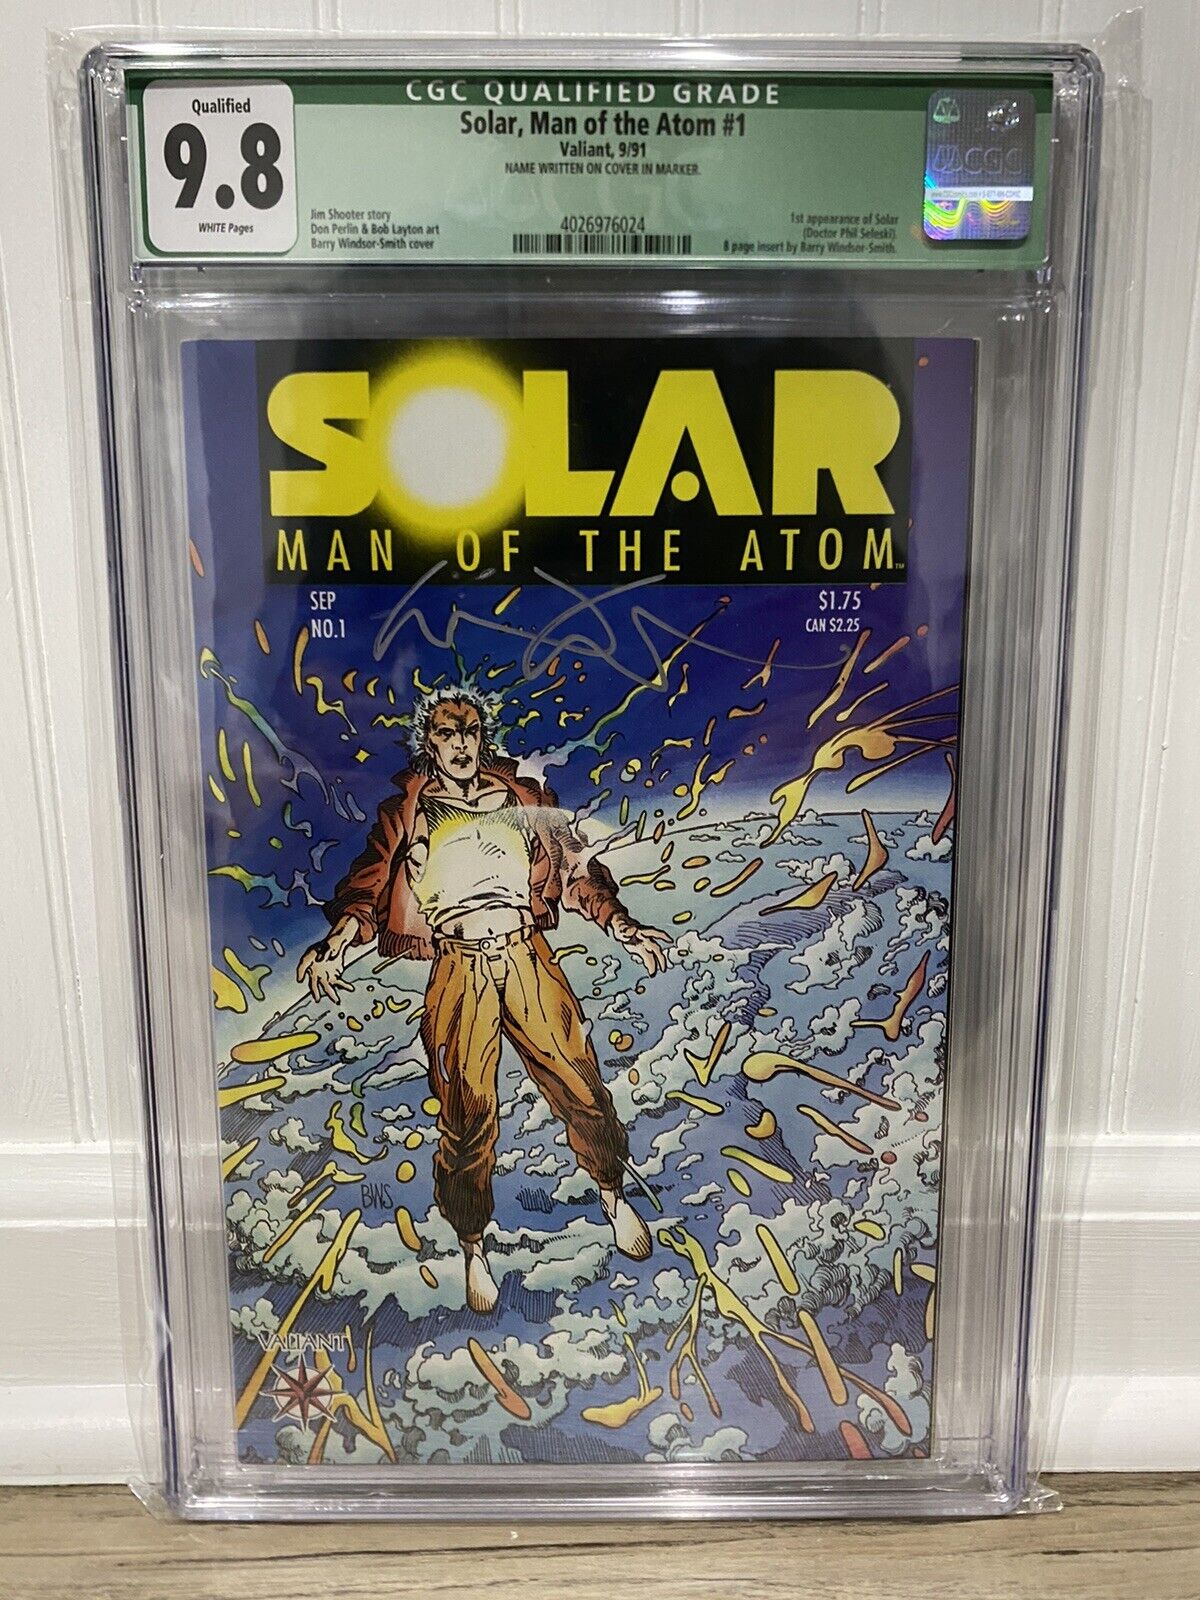 Solar Man Of The Atom #1 CGC 9.8 Qualified Signed Barry Windsor-Smith Valiant